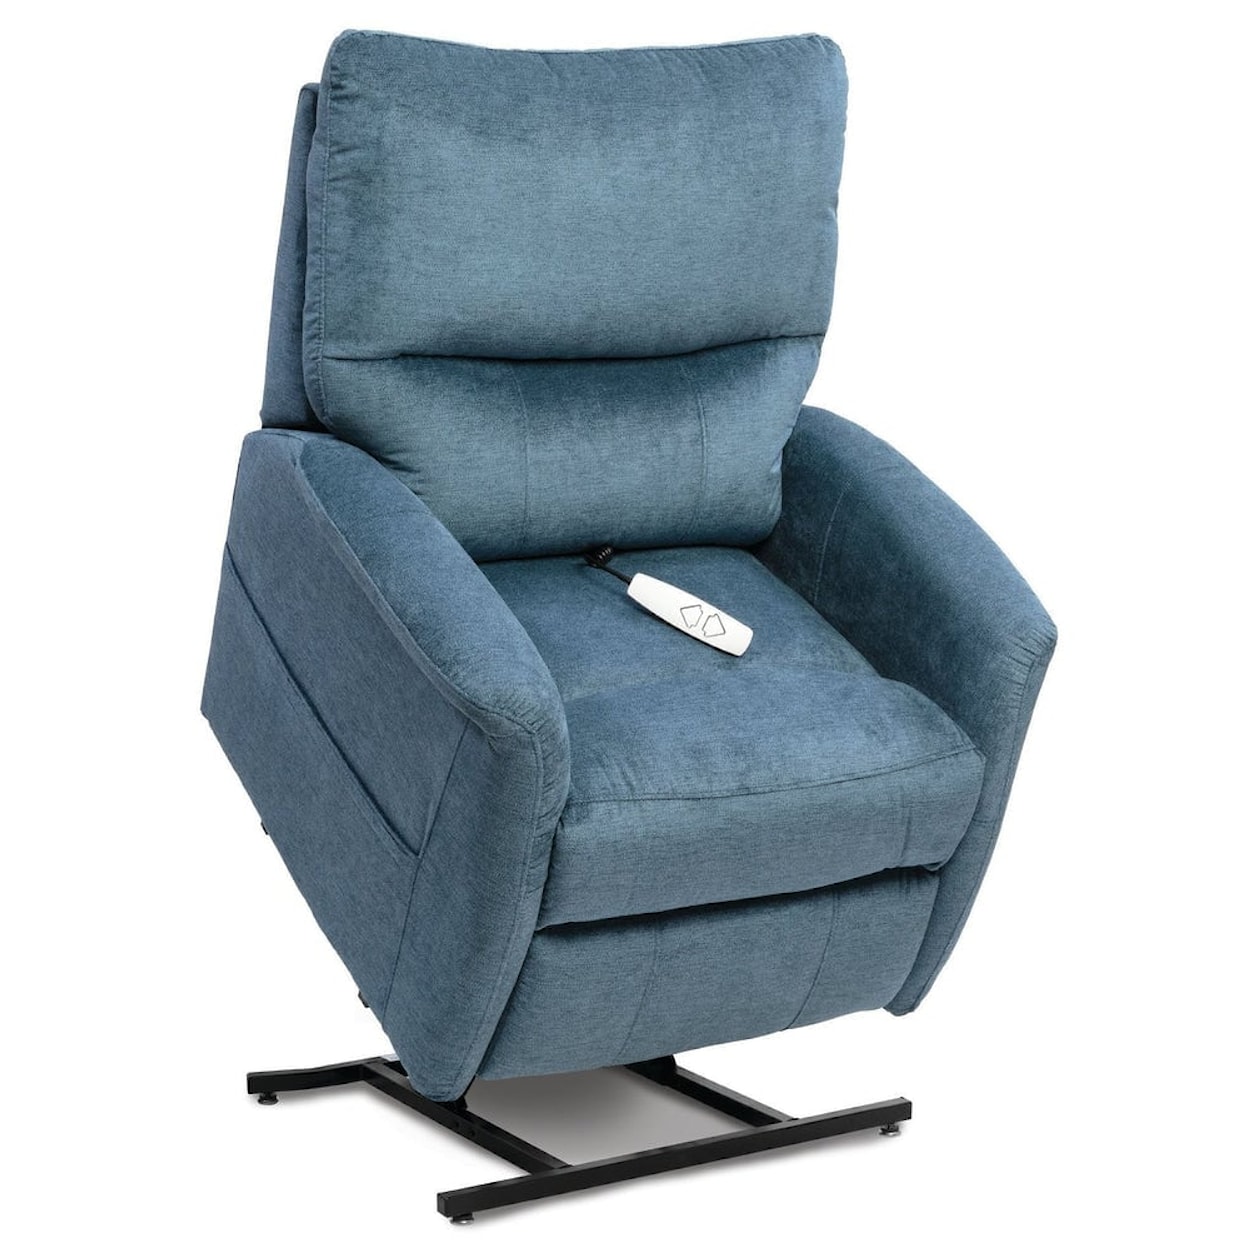 Windermere Motion Windermere Motion 3-Position Electric Lift Chair Recliner